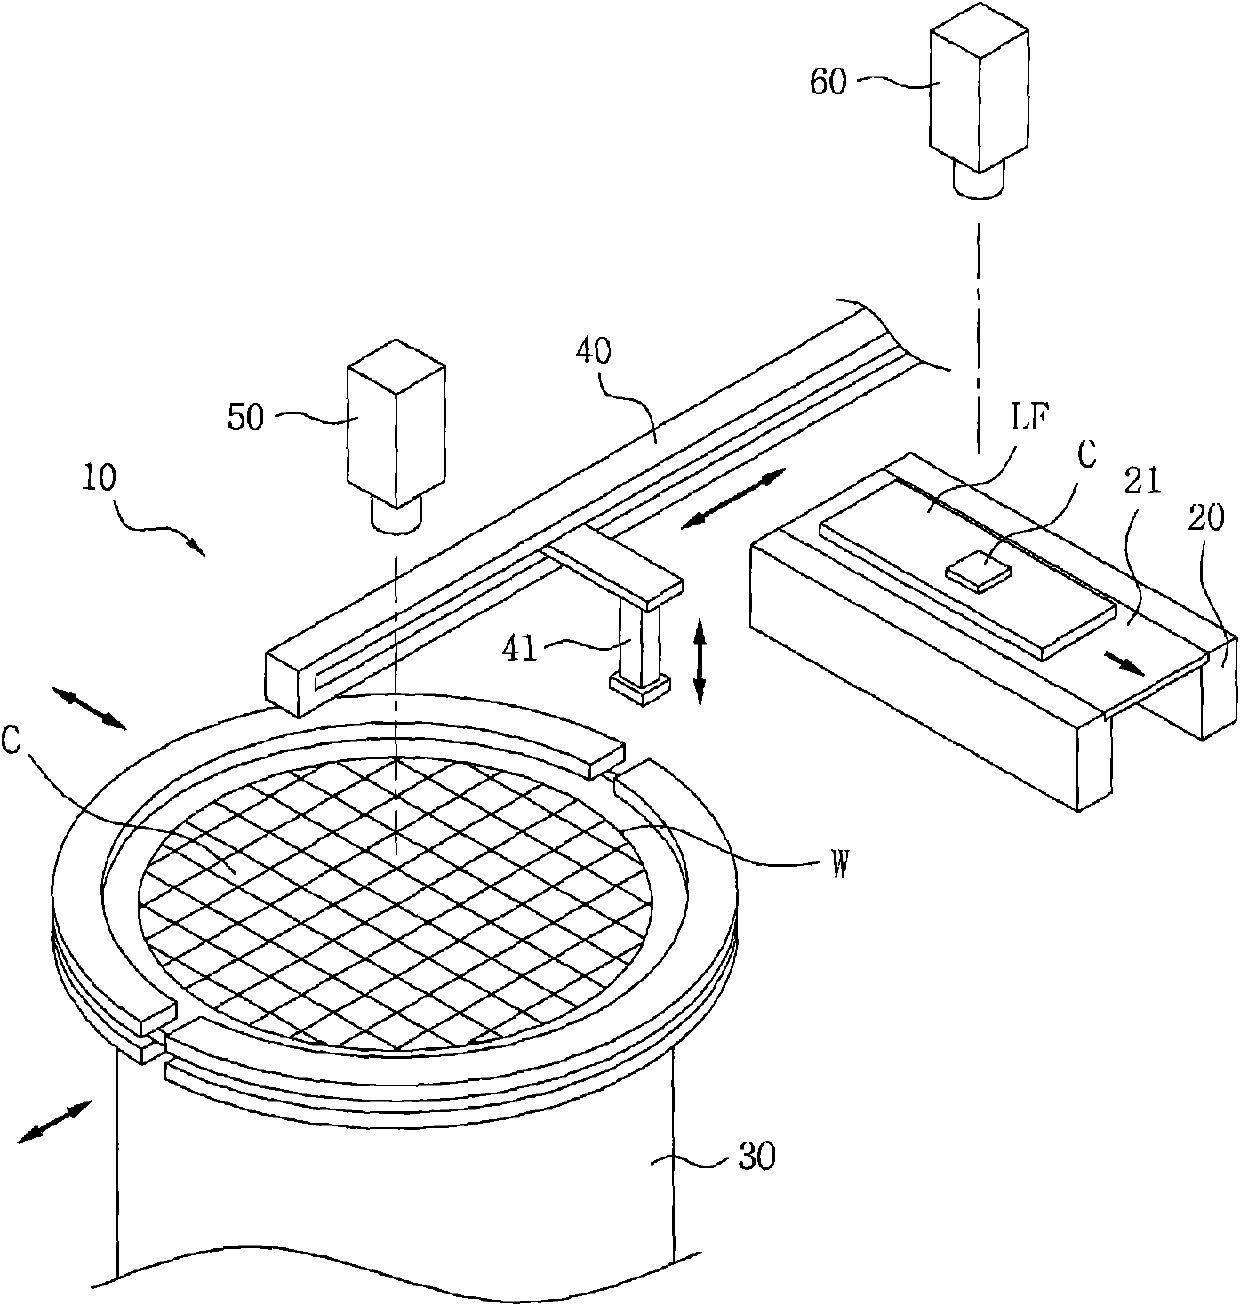 LED chip jointing device